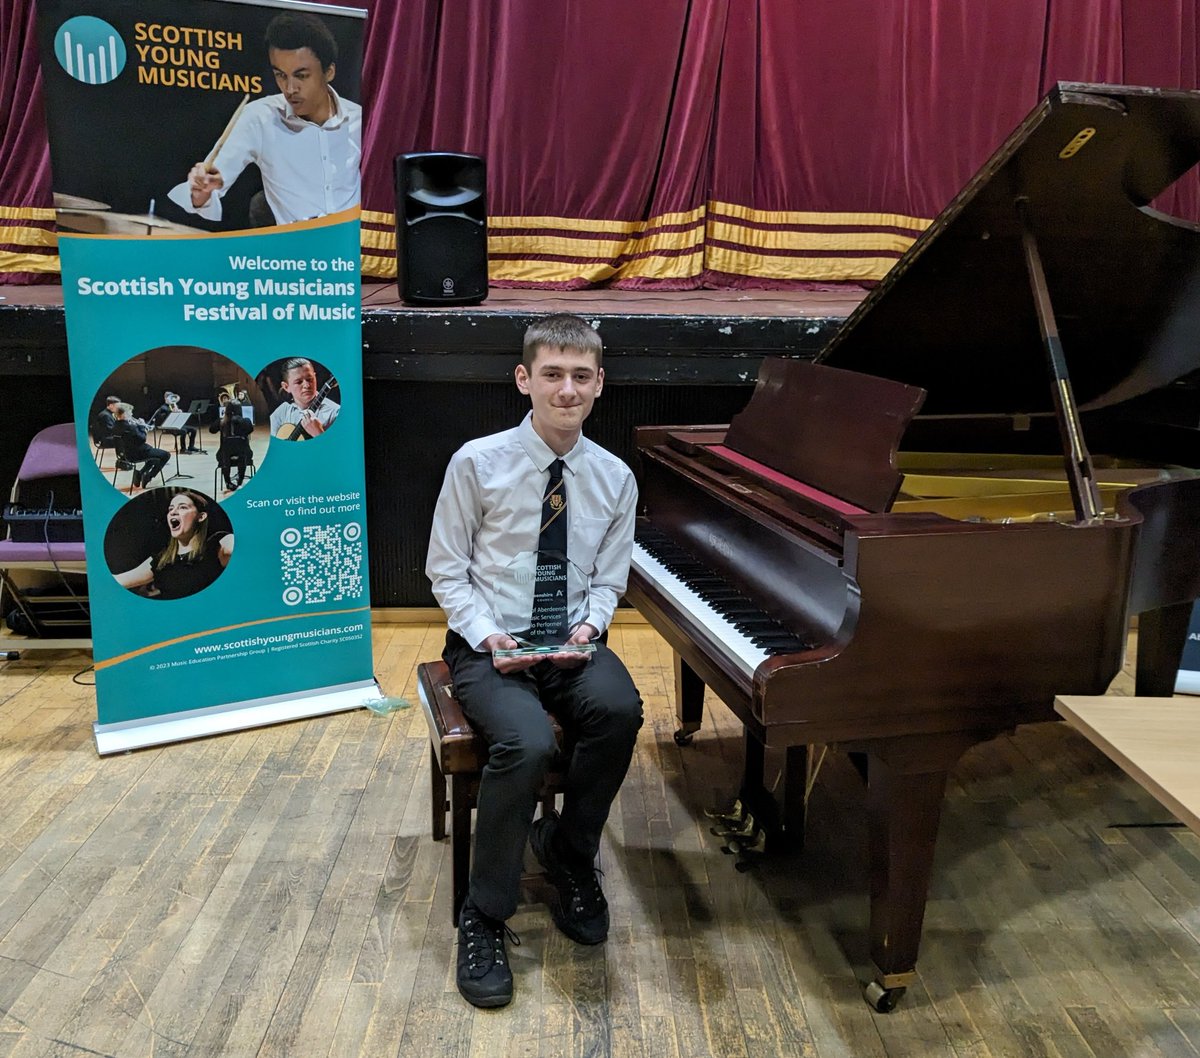 Excited that our son Magnus will be representing #Aberdeenshire at the Scottish Young Musicians Final at @RCStweets in Glasgow later this month after winning his heat last Sunday 🎼🎹🎶 @SYMusicians @Aberdeenshire @MackieAcademy #SYM24